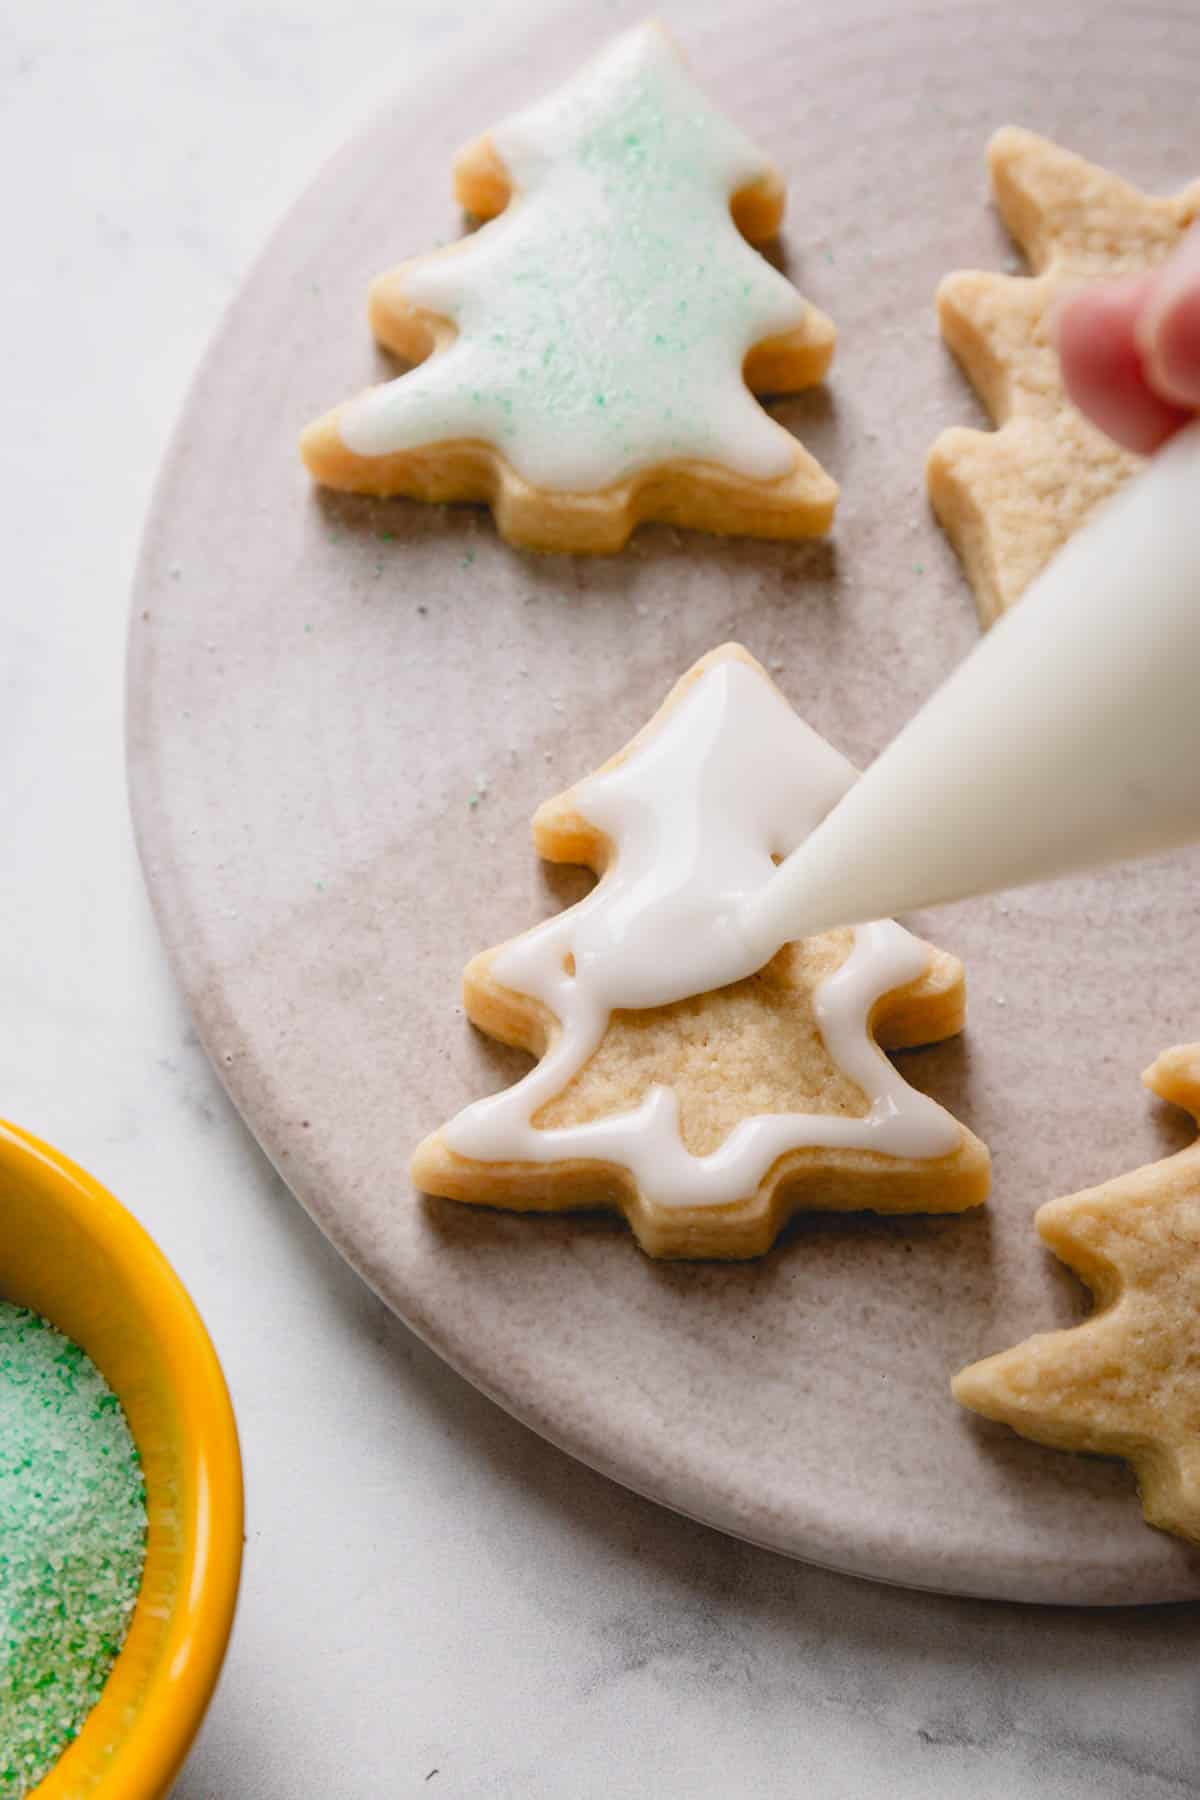 A christmas tree shaped sugar cookie being glazed with white powdered sugar icing.